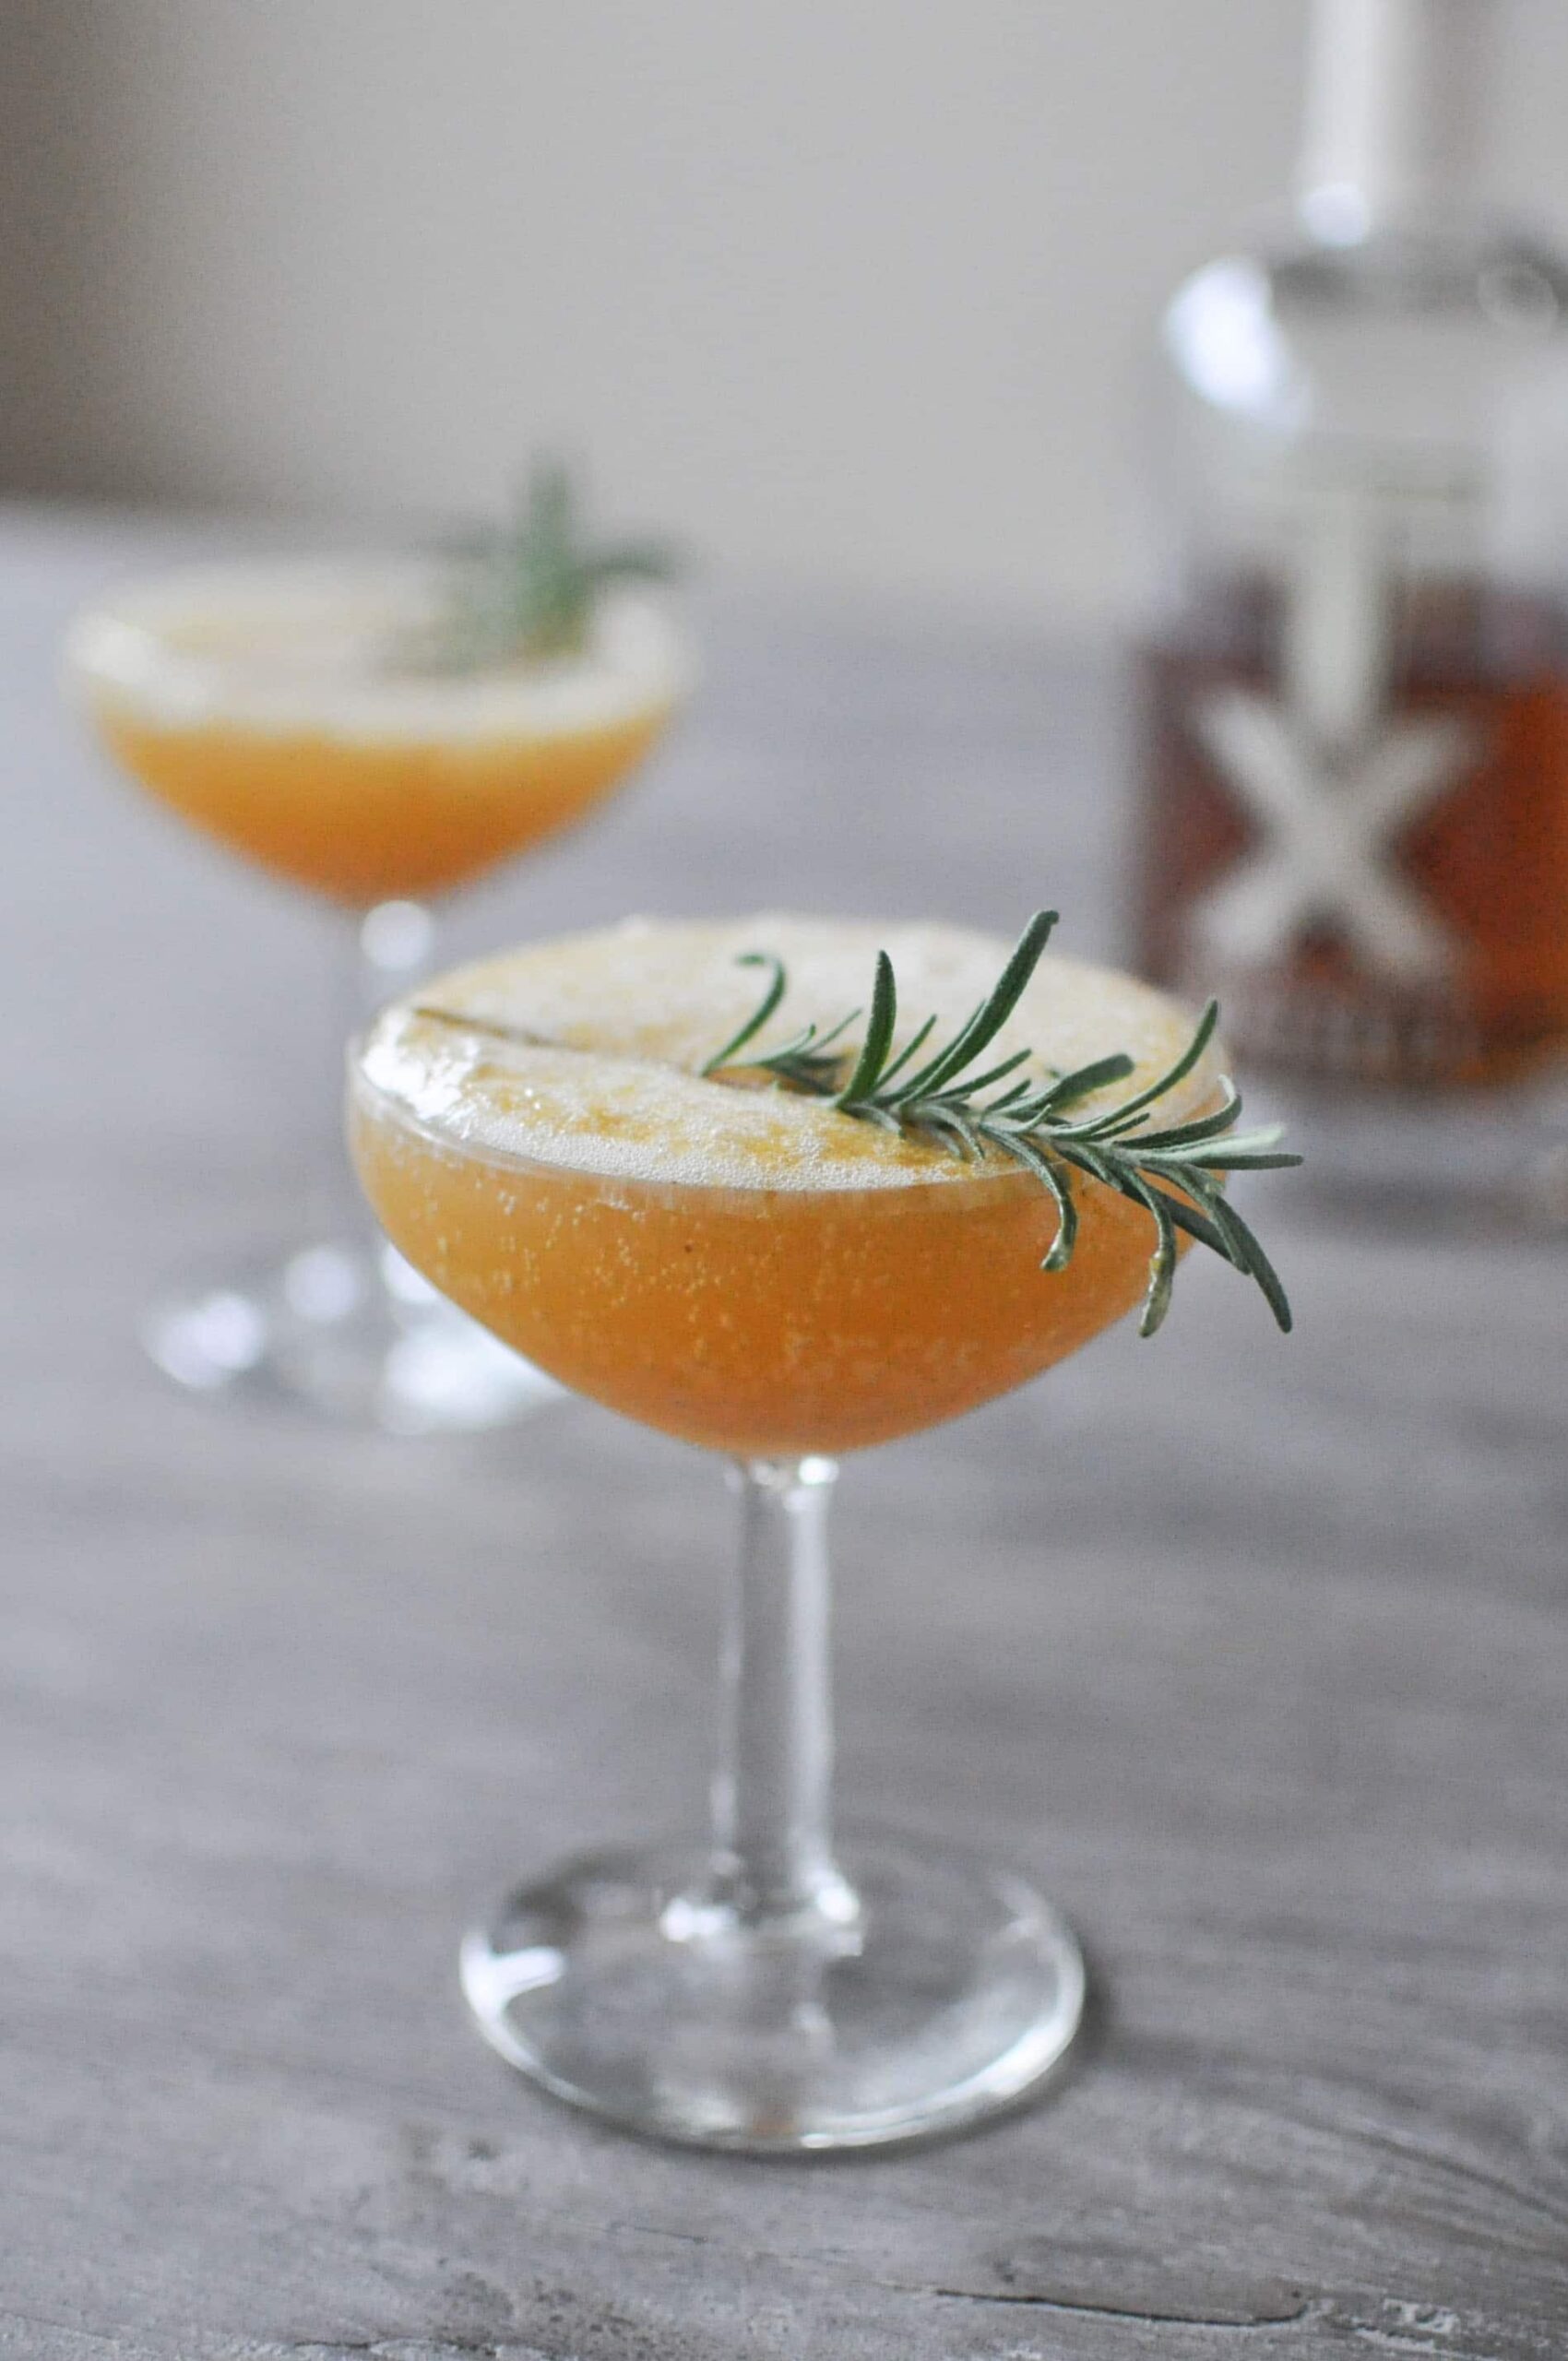 A glass of cocktail garnished with a sprig of rosemary in a glass.